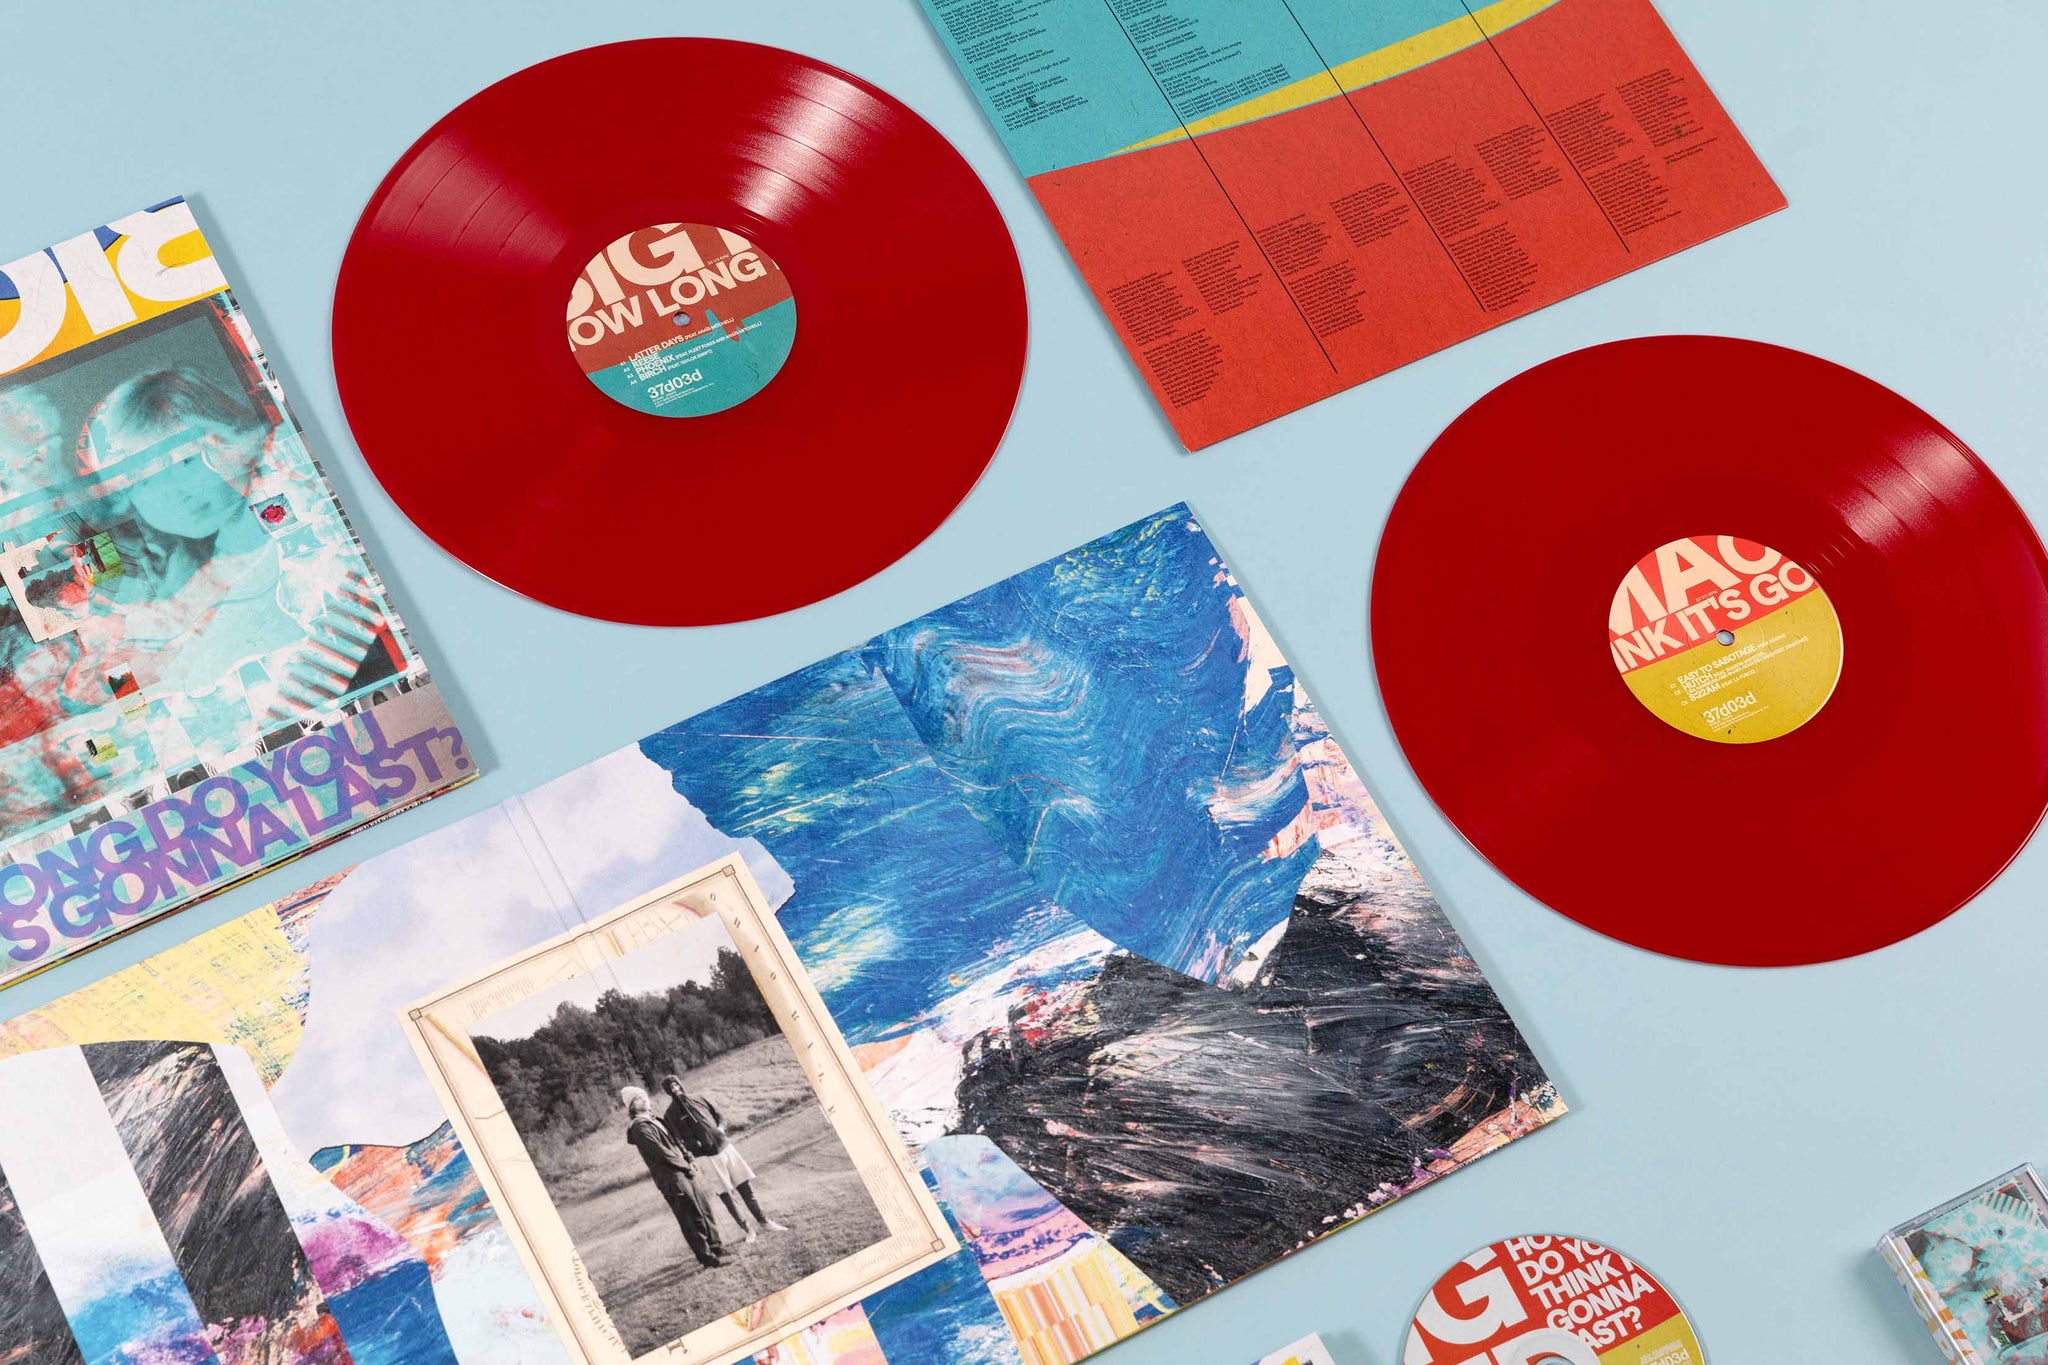 How Long Do You Think It's Gonna Last? Exclusive 2LP